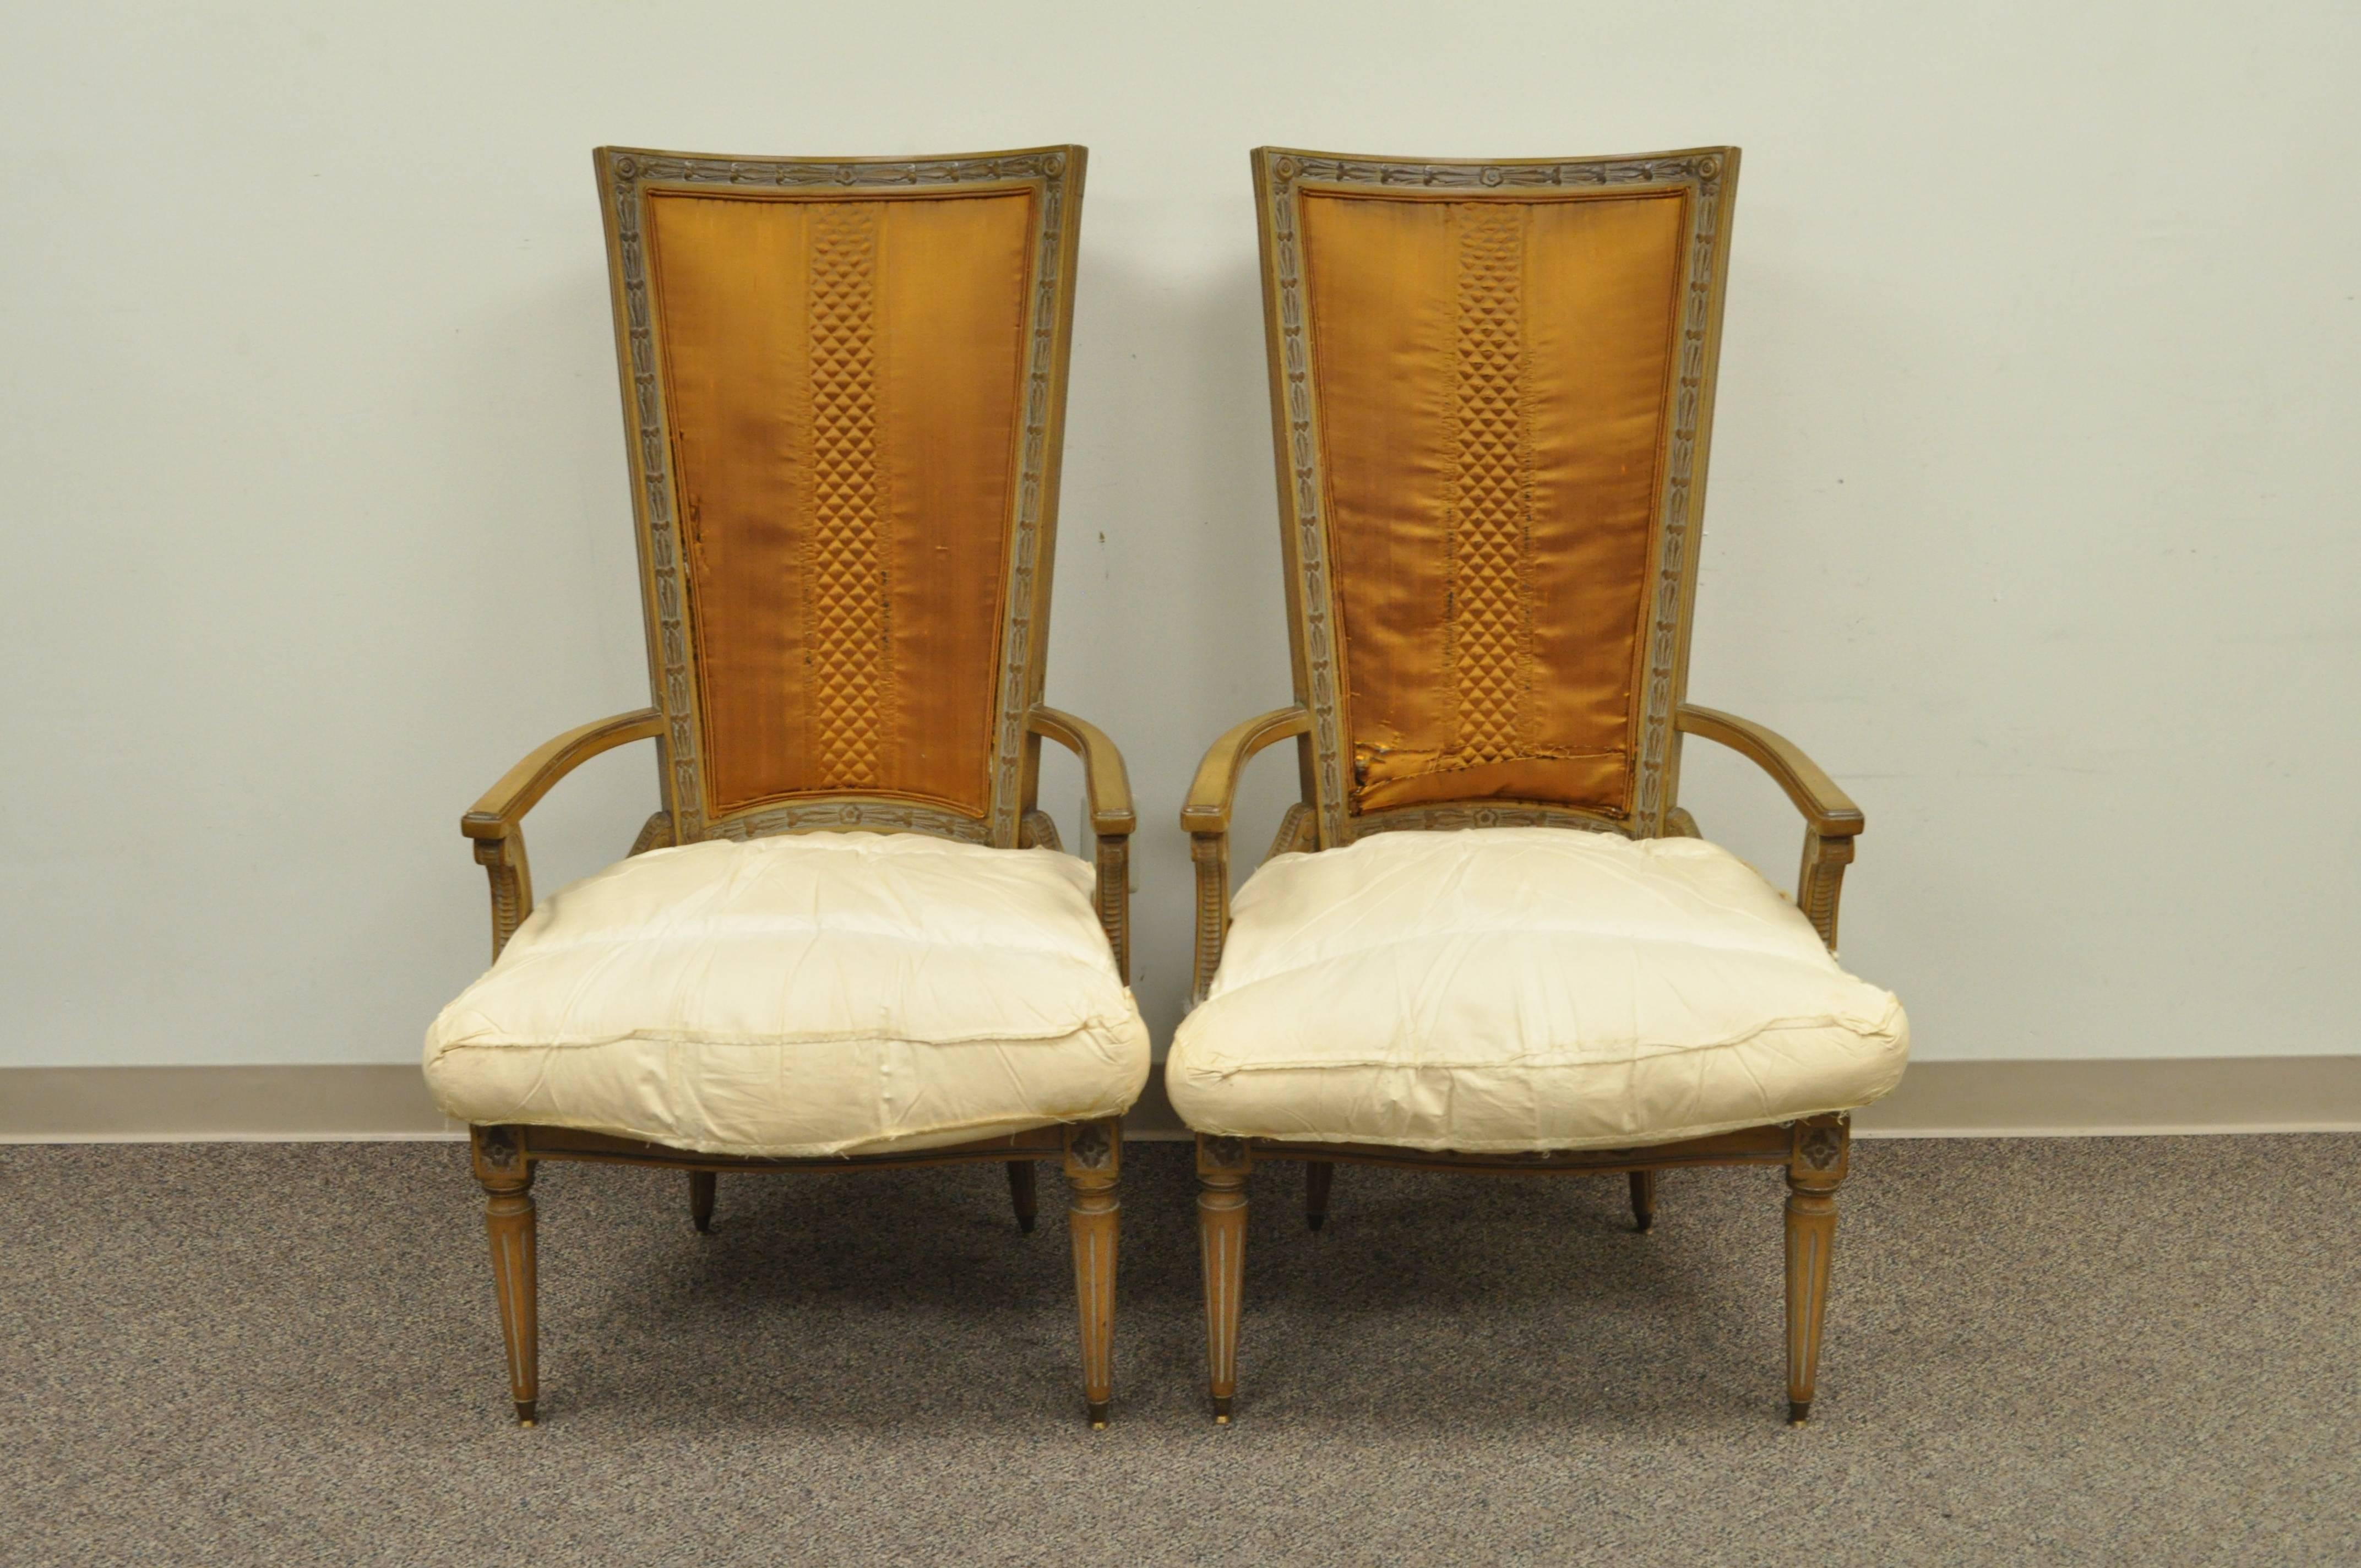 Pair of Tall Back Hollywood Regency Sculptural Arm Chairs after Dorothy Draper 1